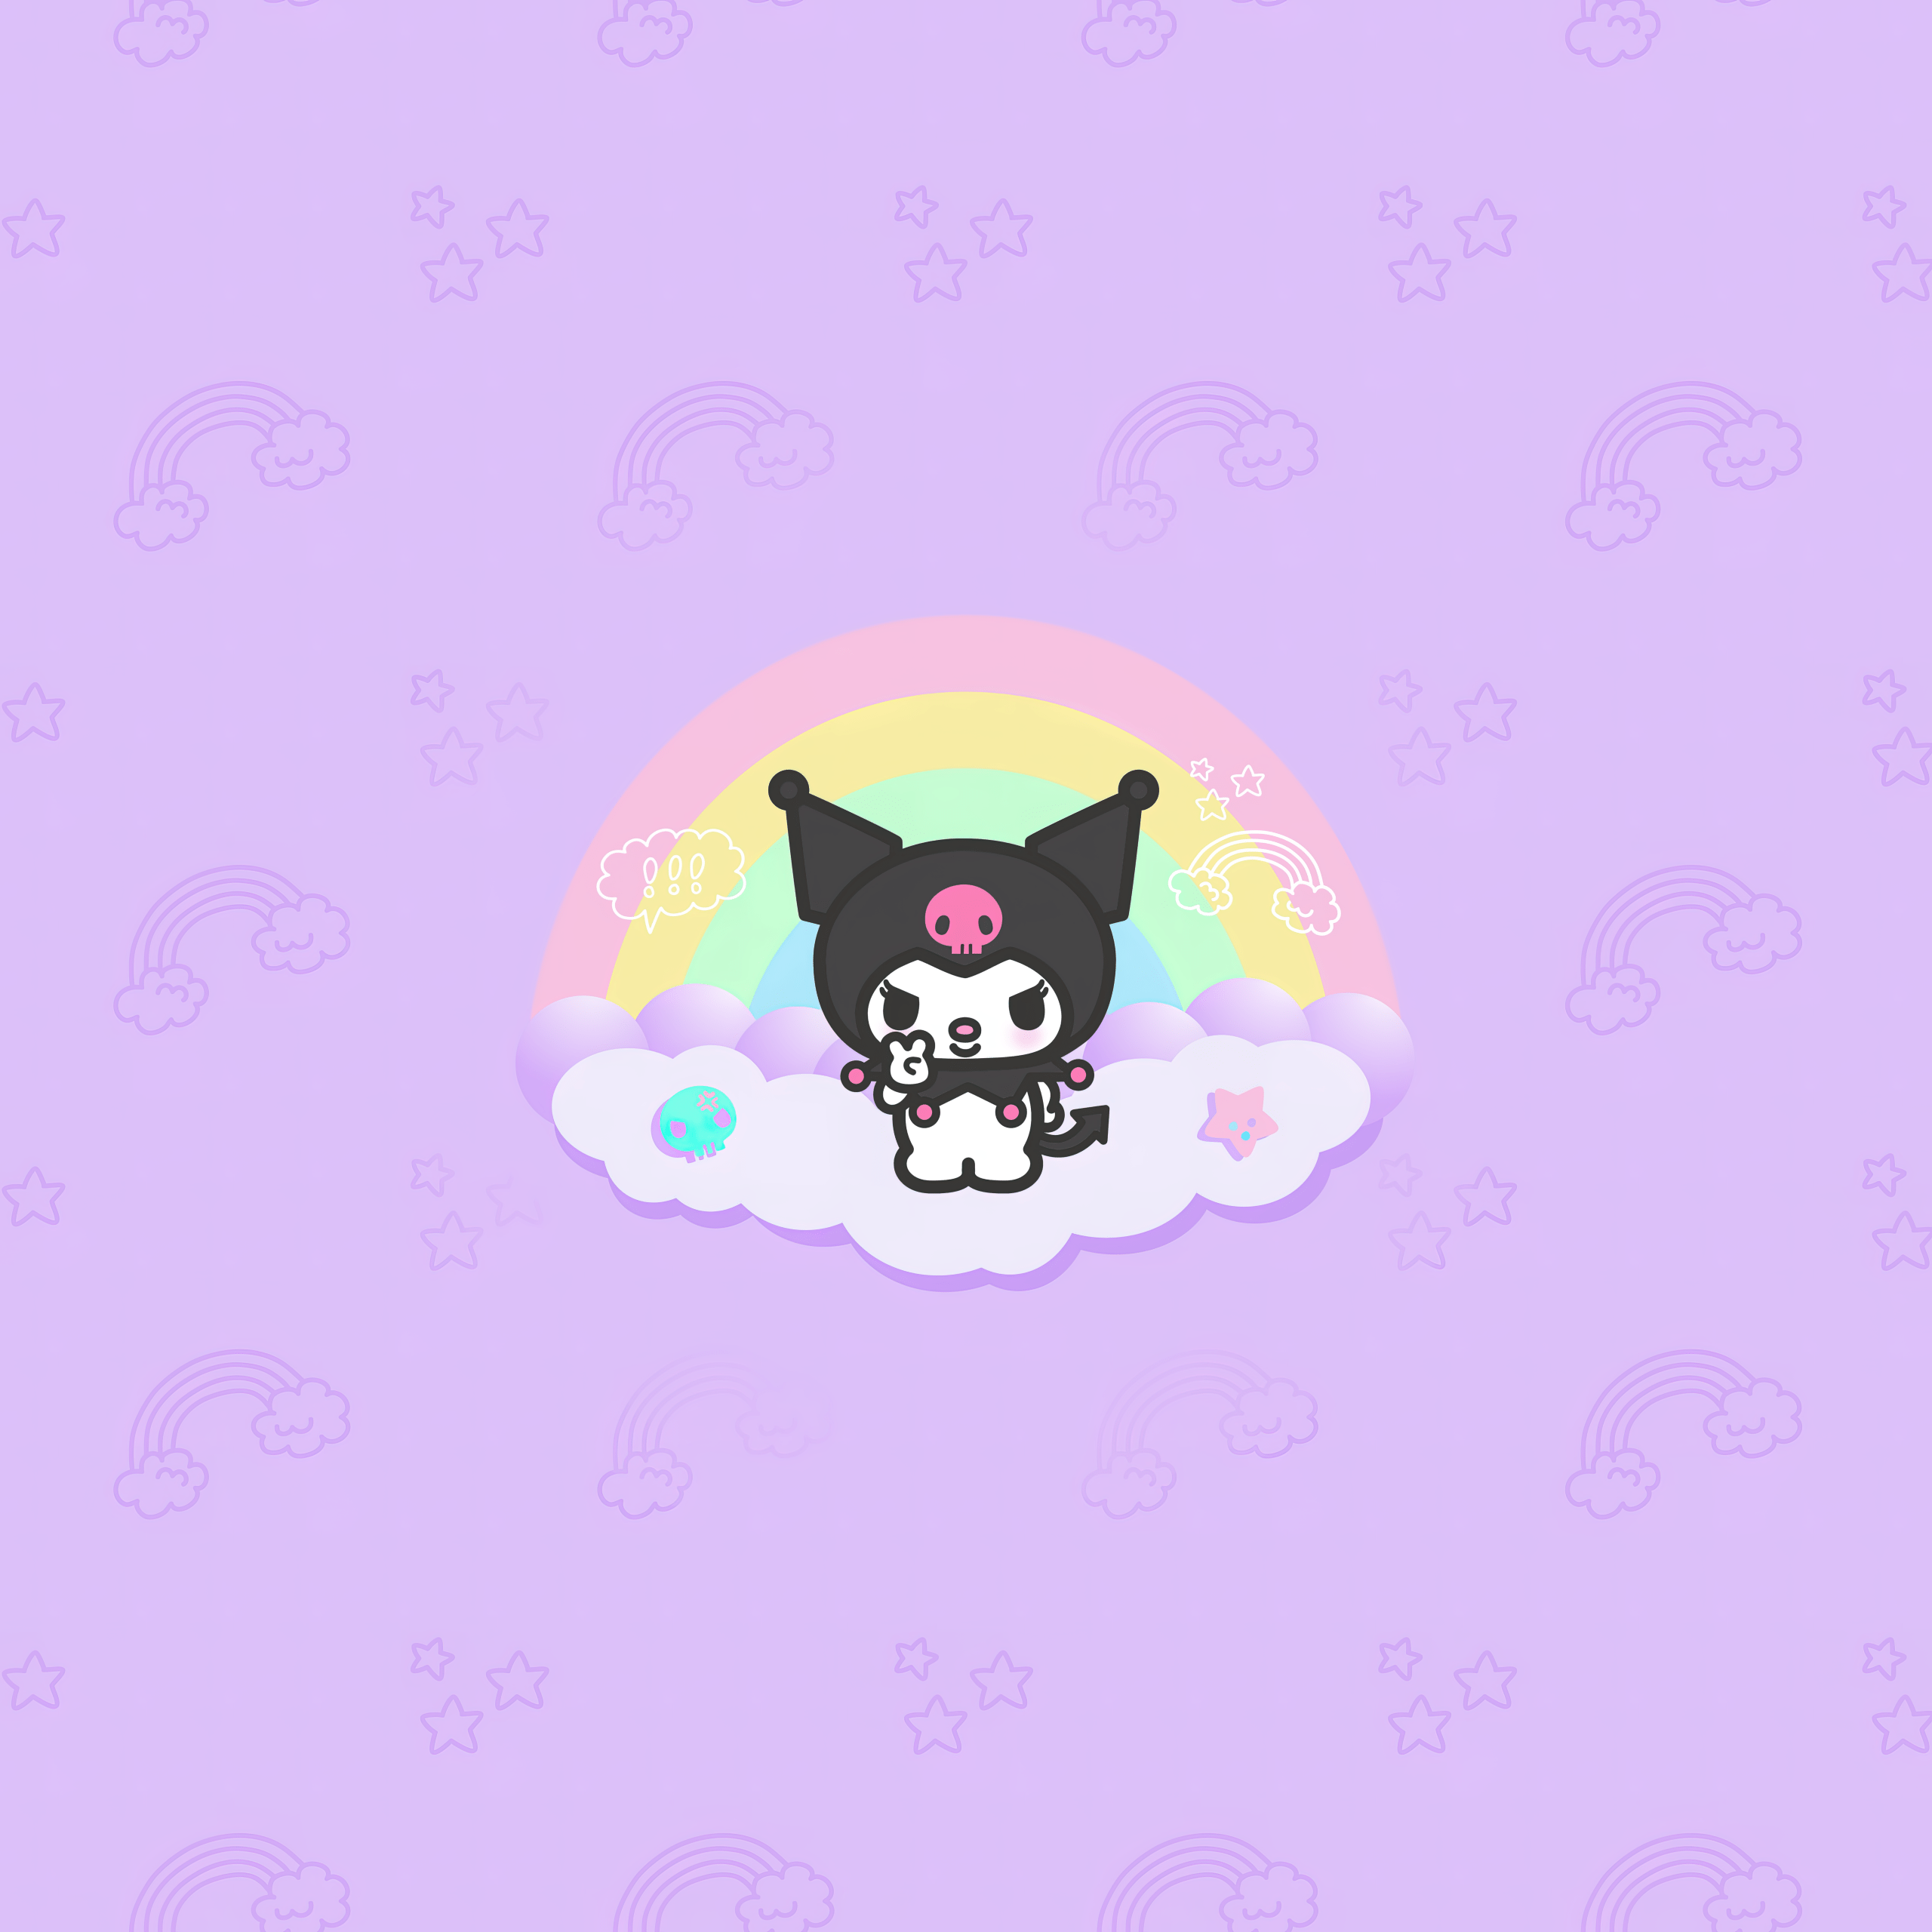 Kuromi is sitting on a cloud with a pink controller in her hand. - Sanrio